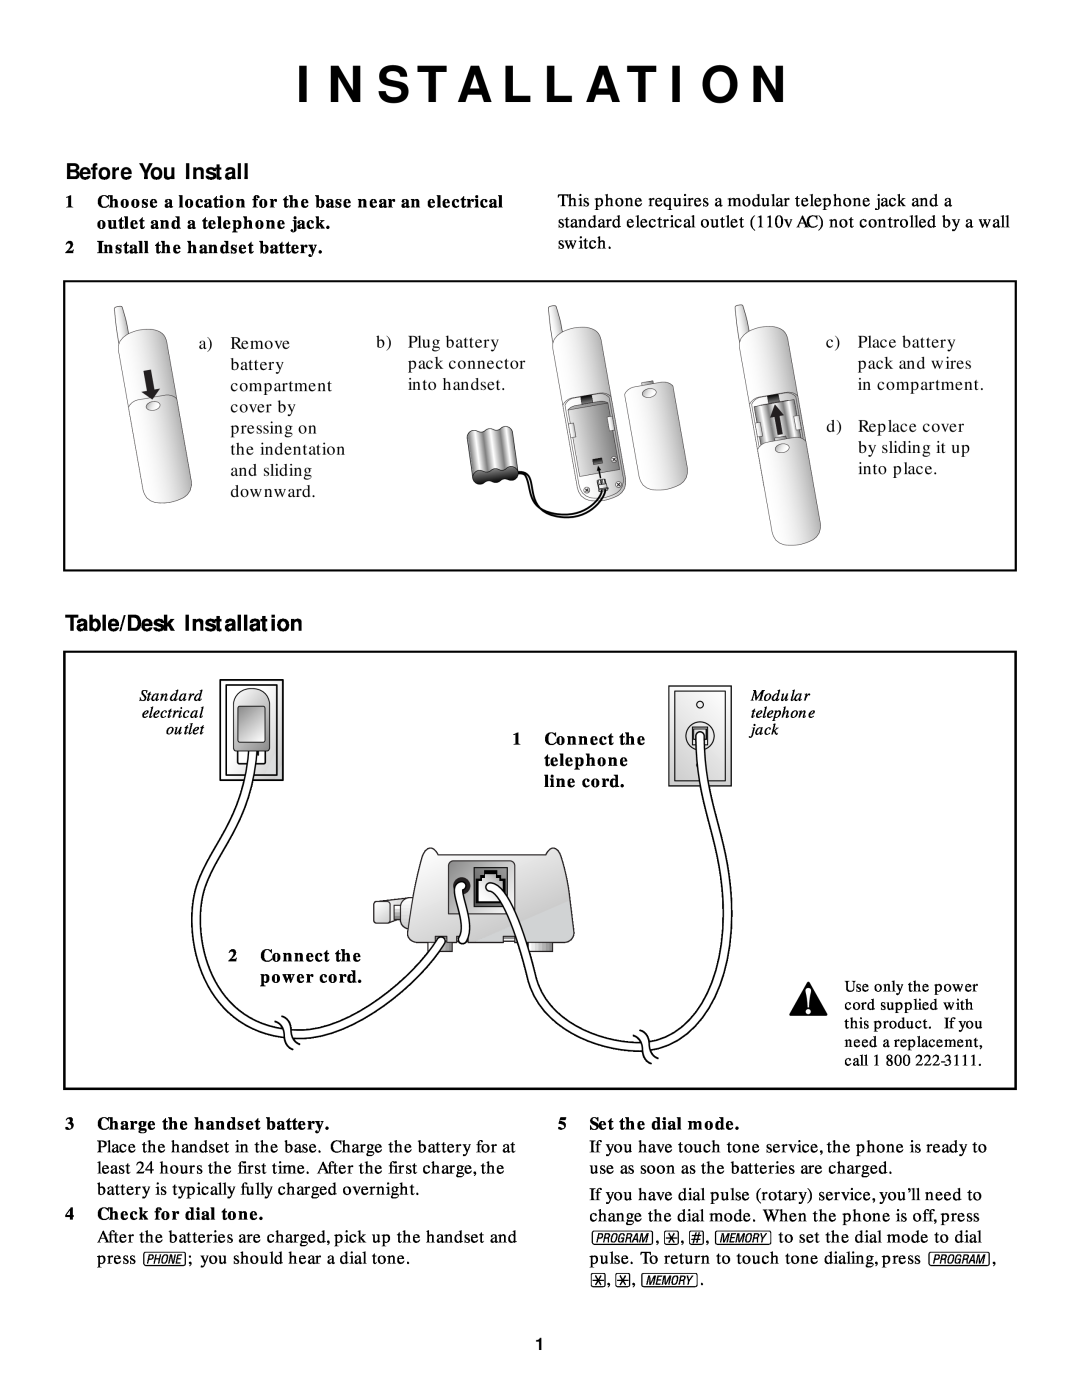 AT&T 9210 user manual I N S T A L L A T I O N, Before You Install, Table/Desk Installation 